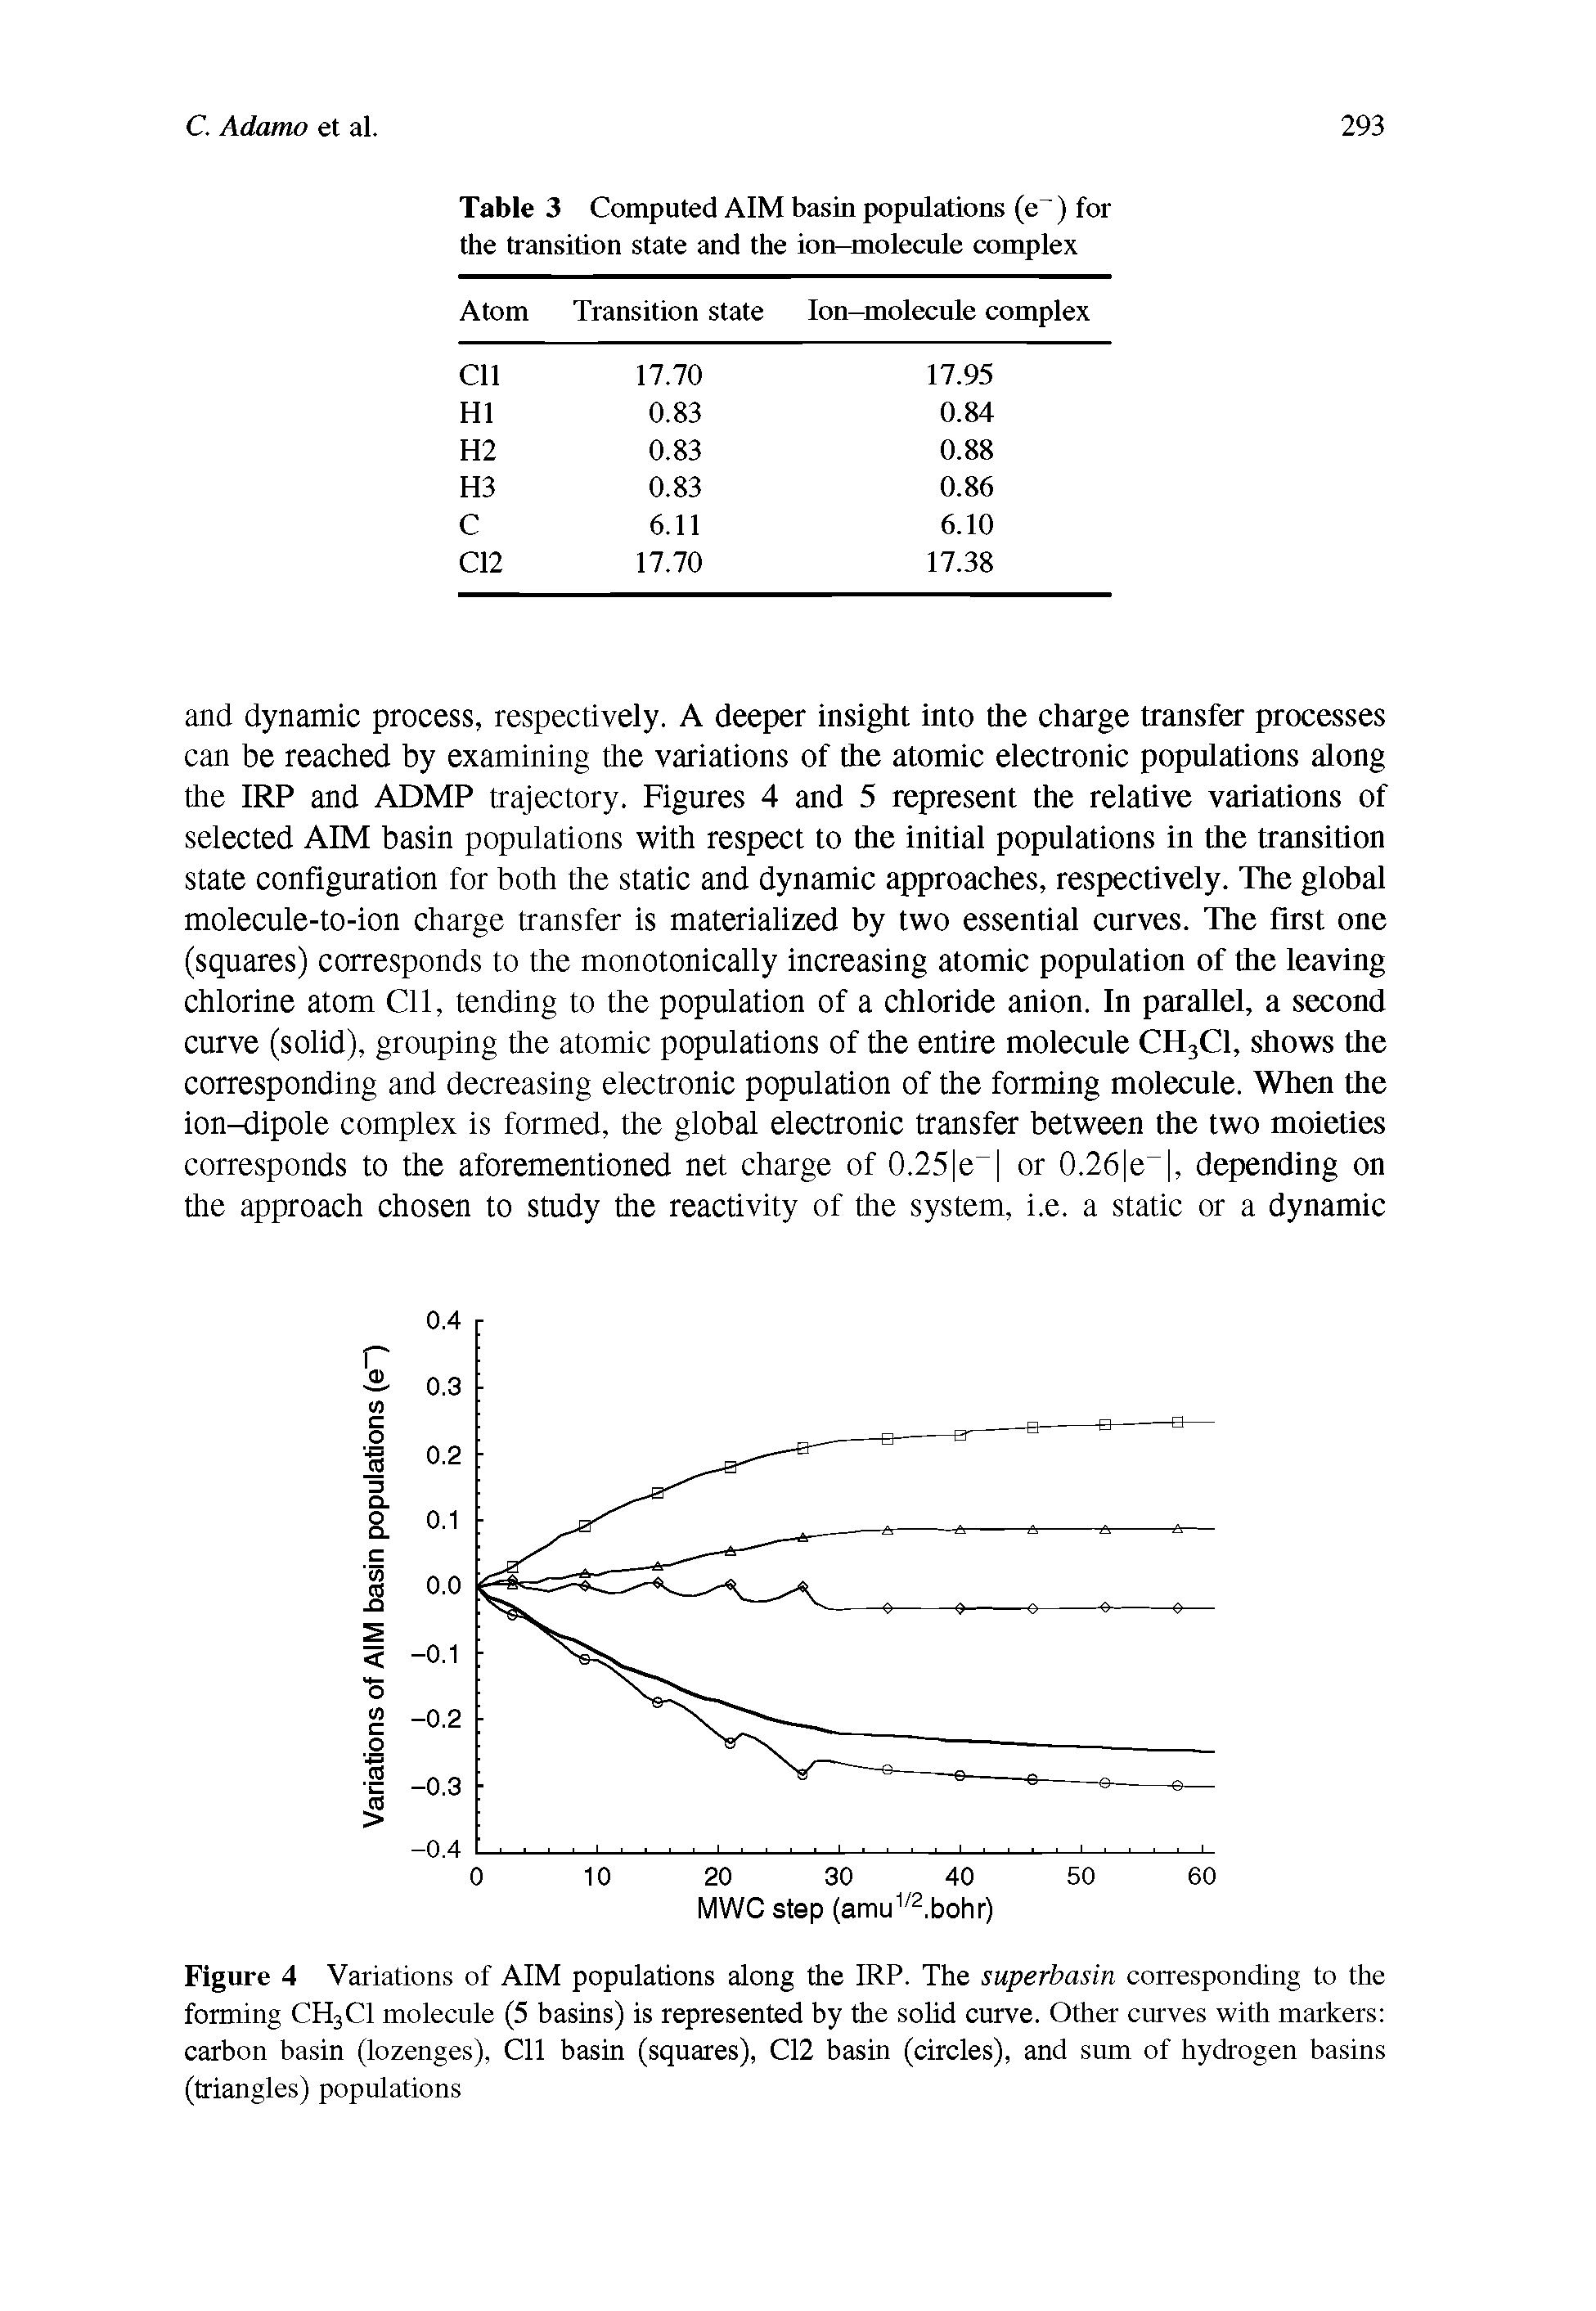 Table 3 Computed AIM basin populations (e ) for the transition state and the ion-molecule complex...